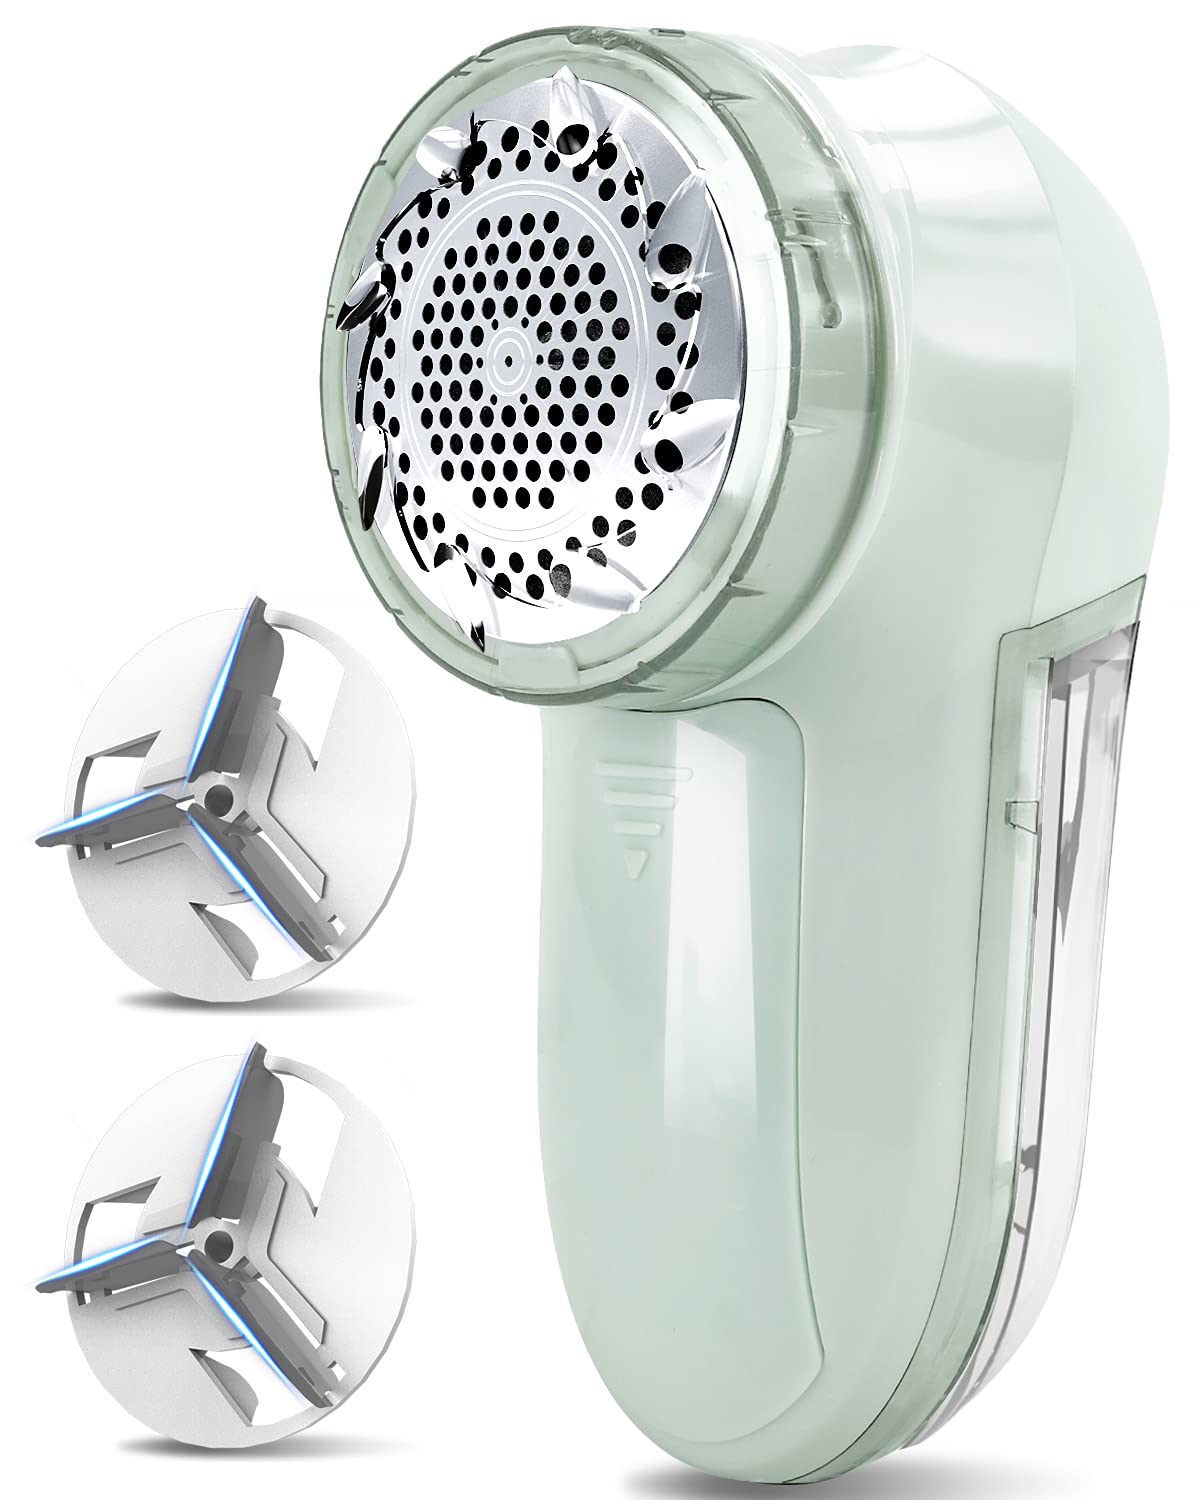 JUEYINGBAILI Fabric Lint Shaver - Fuzz Remover, with 3 Shave Heights ,  Battery Operated, AC120V Electric Sweater Shaver, Light Green - Remove  Clothes Fuzz, Lint Balls, Pills, Bobbles.